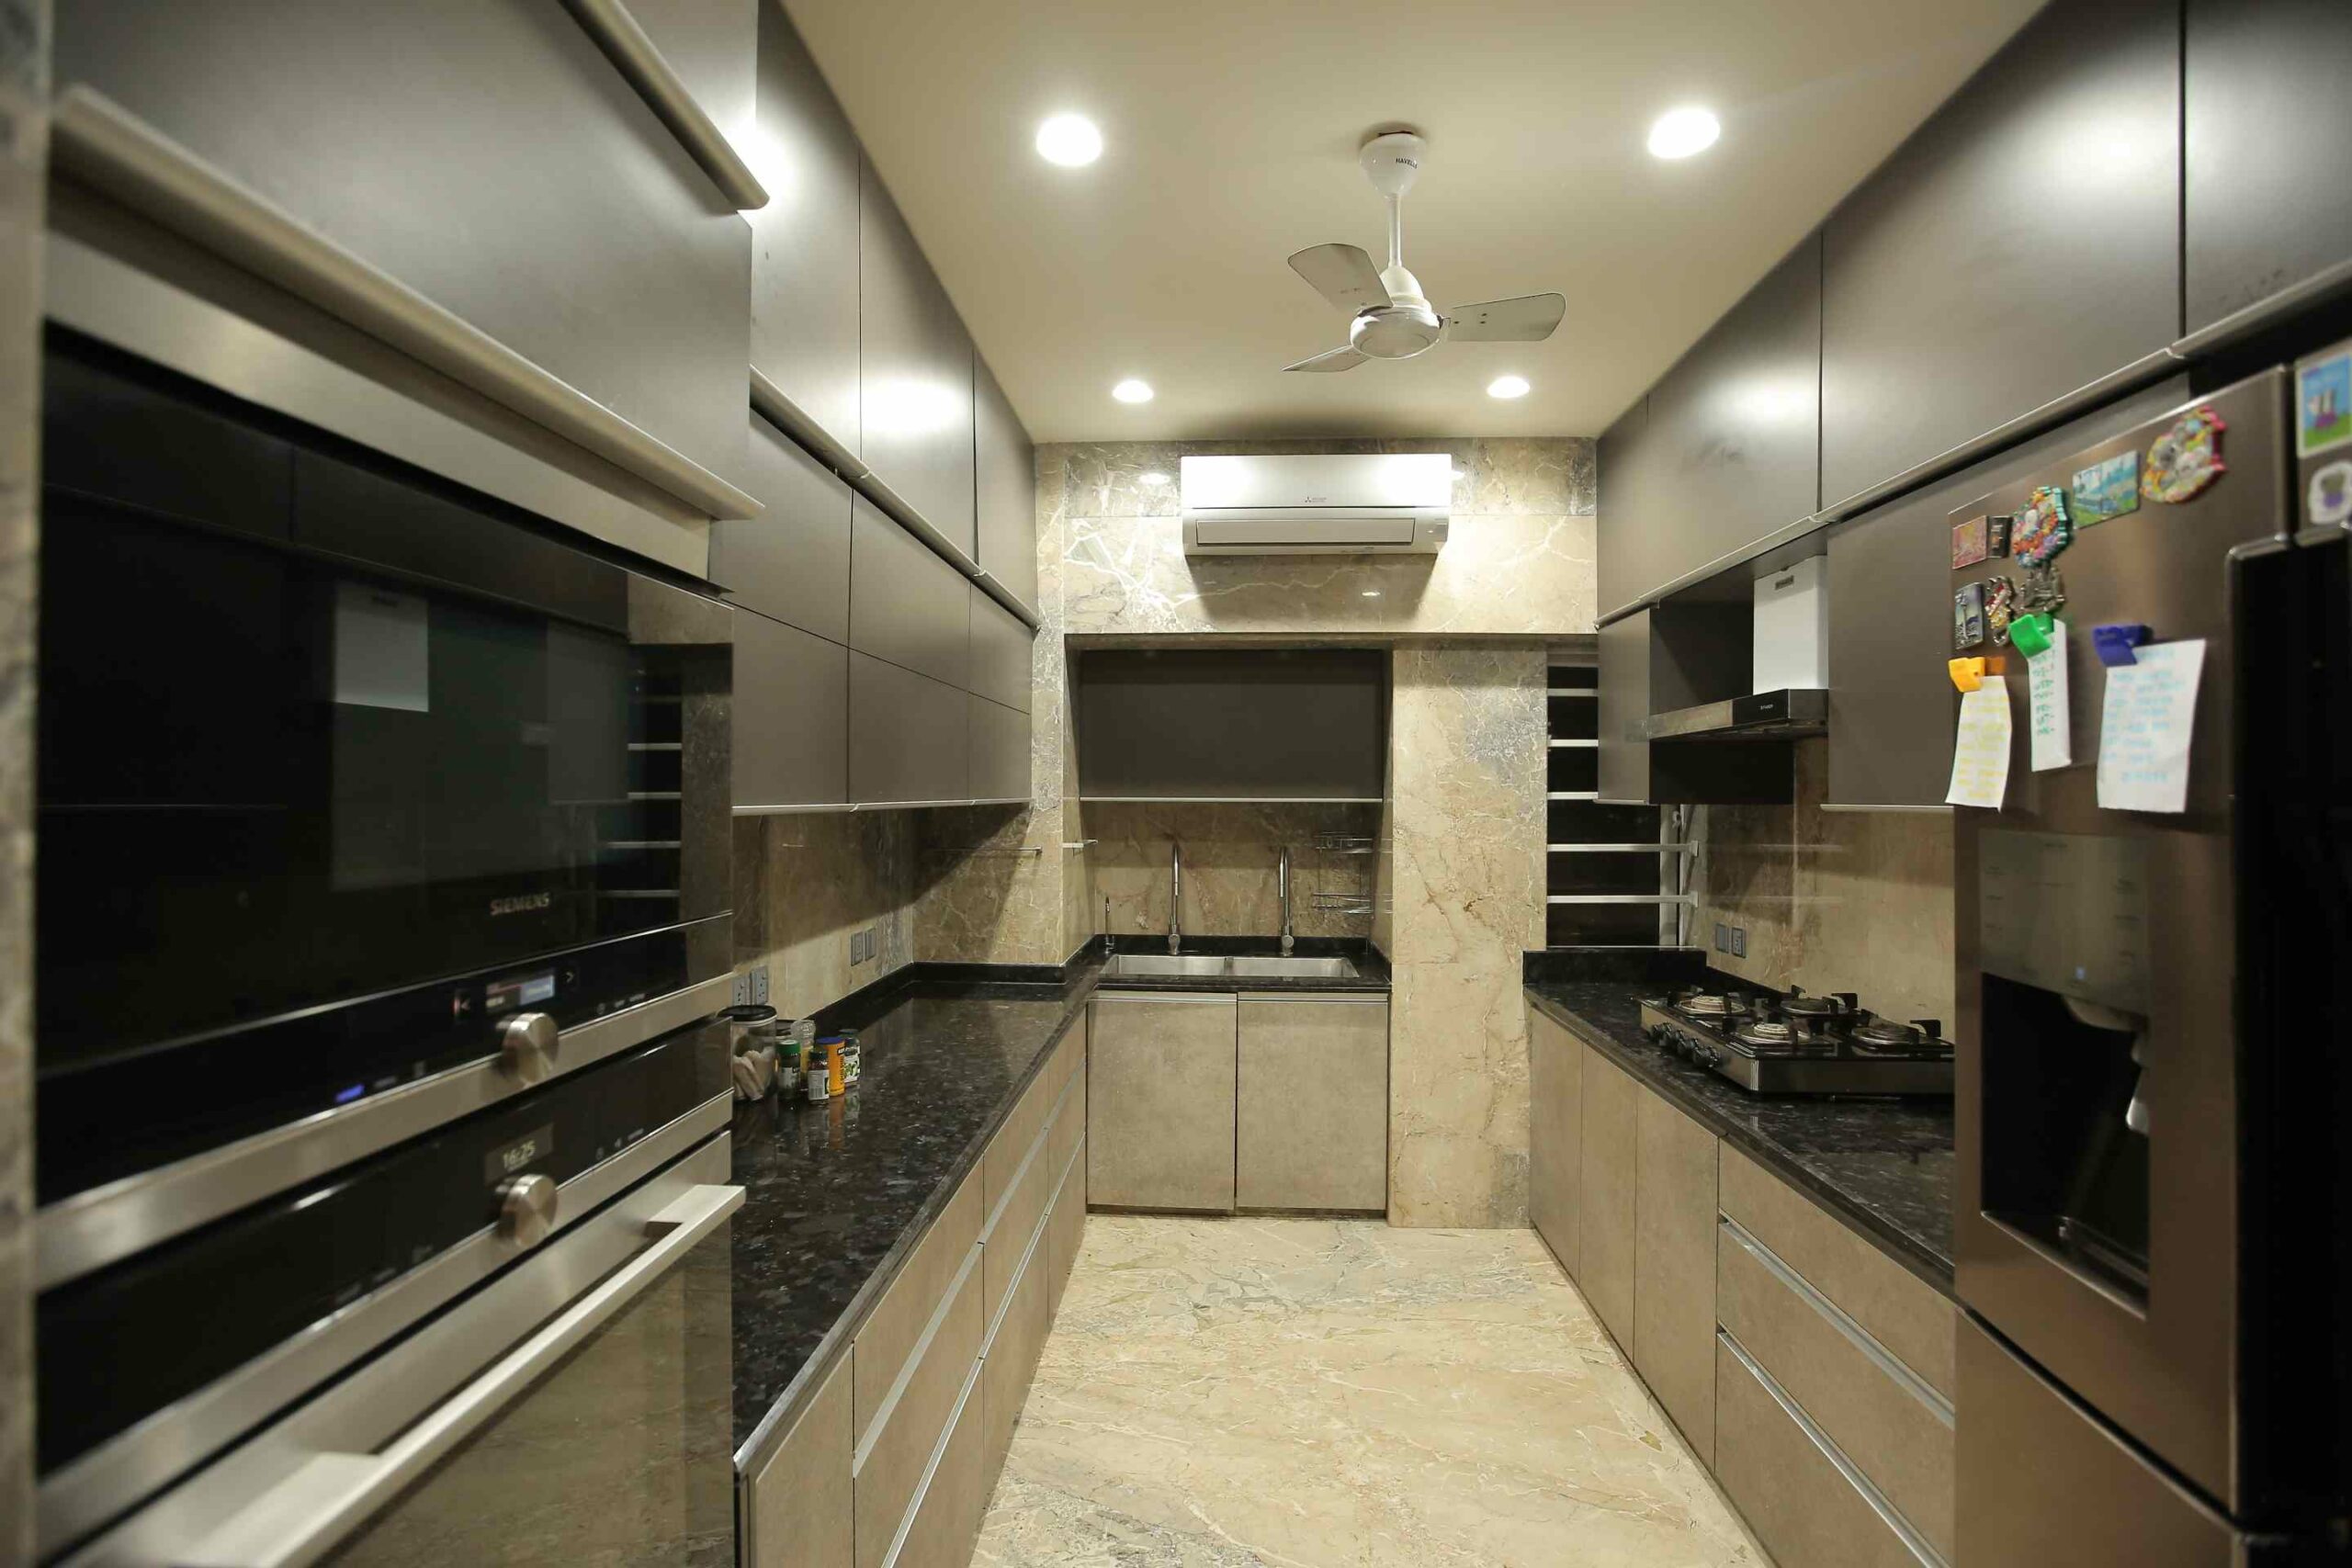 silver kitchen cabinets with black appliances, fan, sink, and AC, smart automated home appliances in a high end kitchen design by interior designer Vandana Buddhia or Vermillion